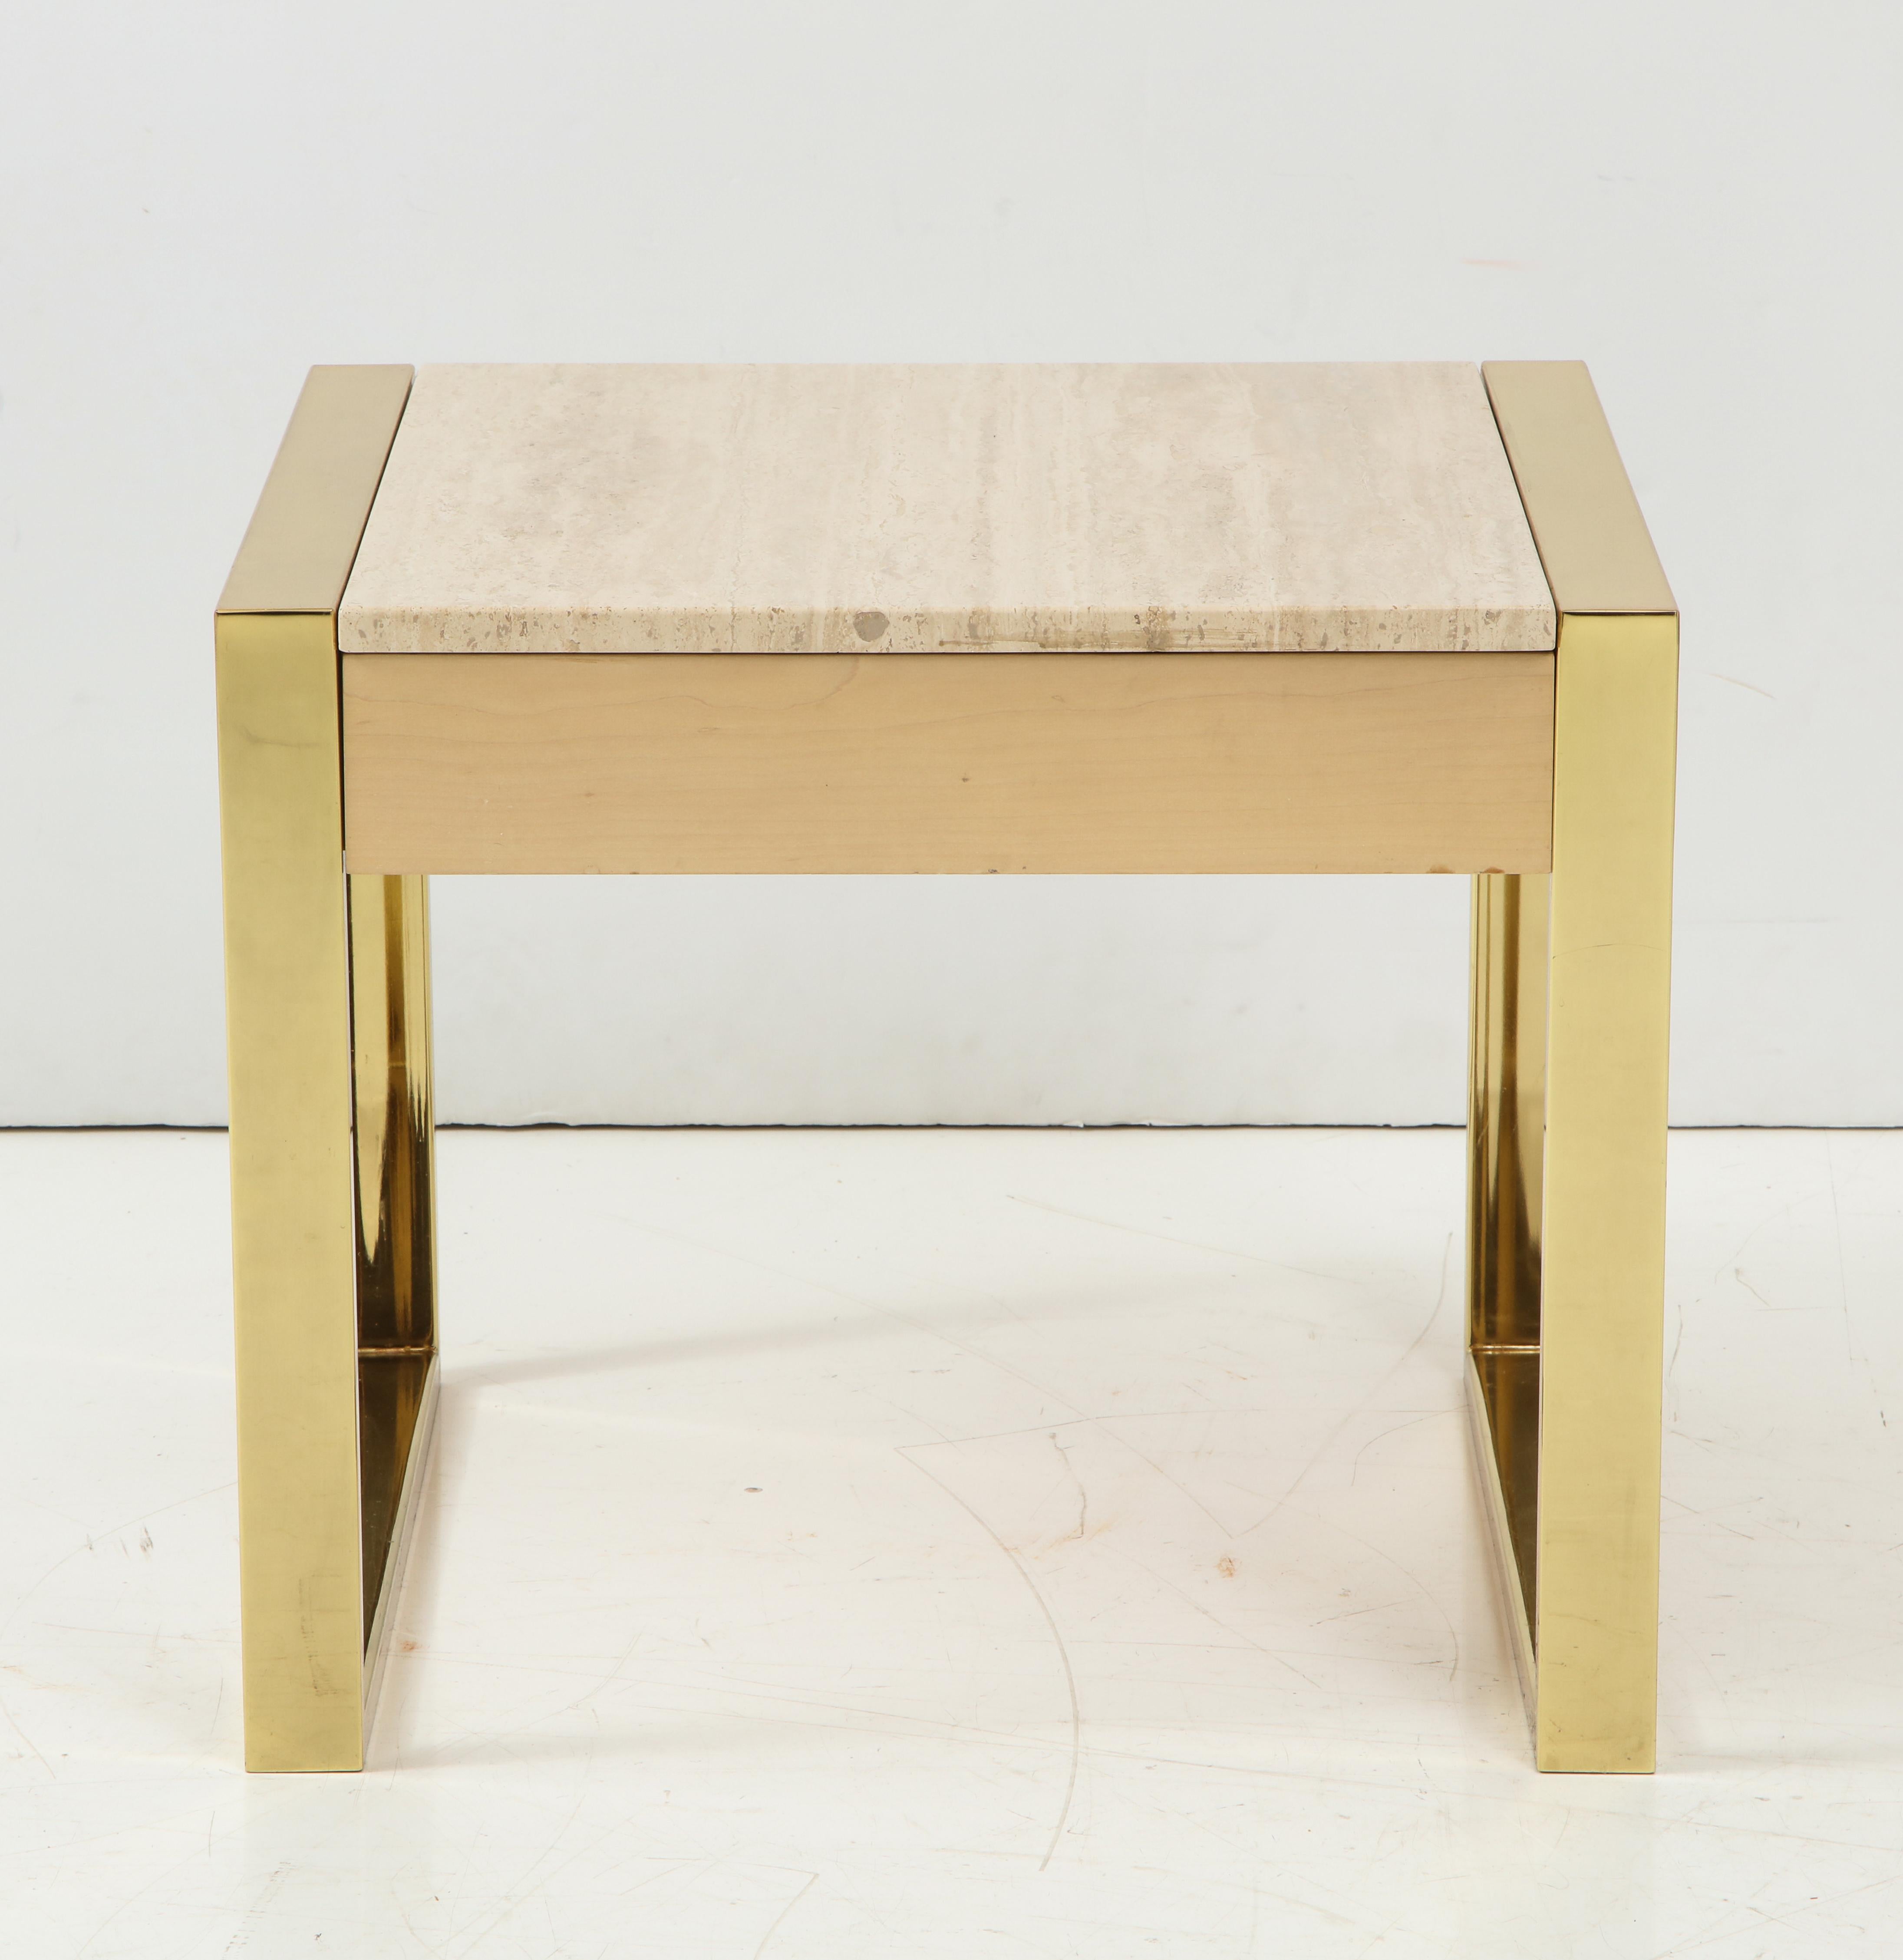 Polished brass and Travertine side table with a single drawer
makes this a versatile table or nightstand.